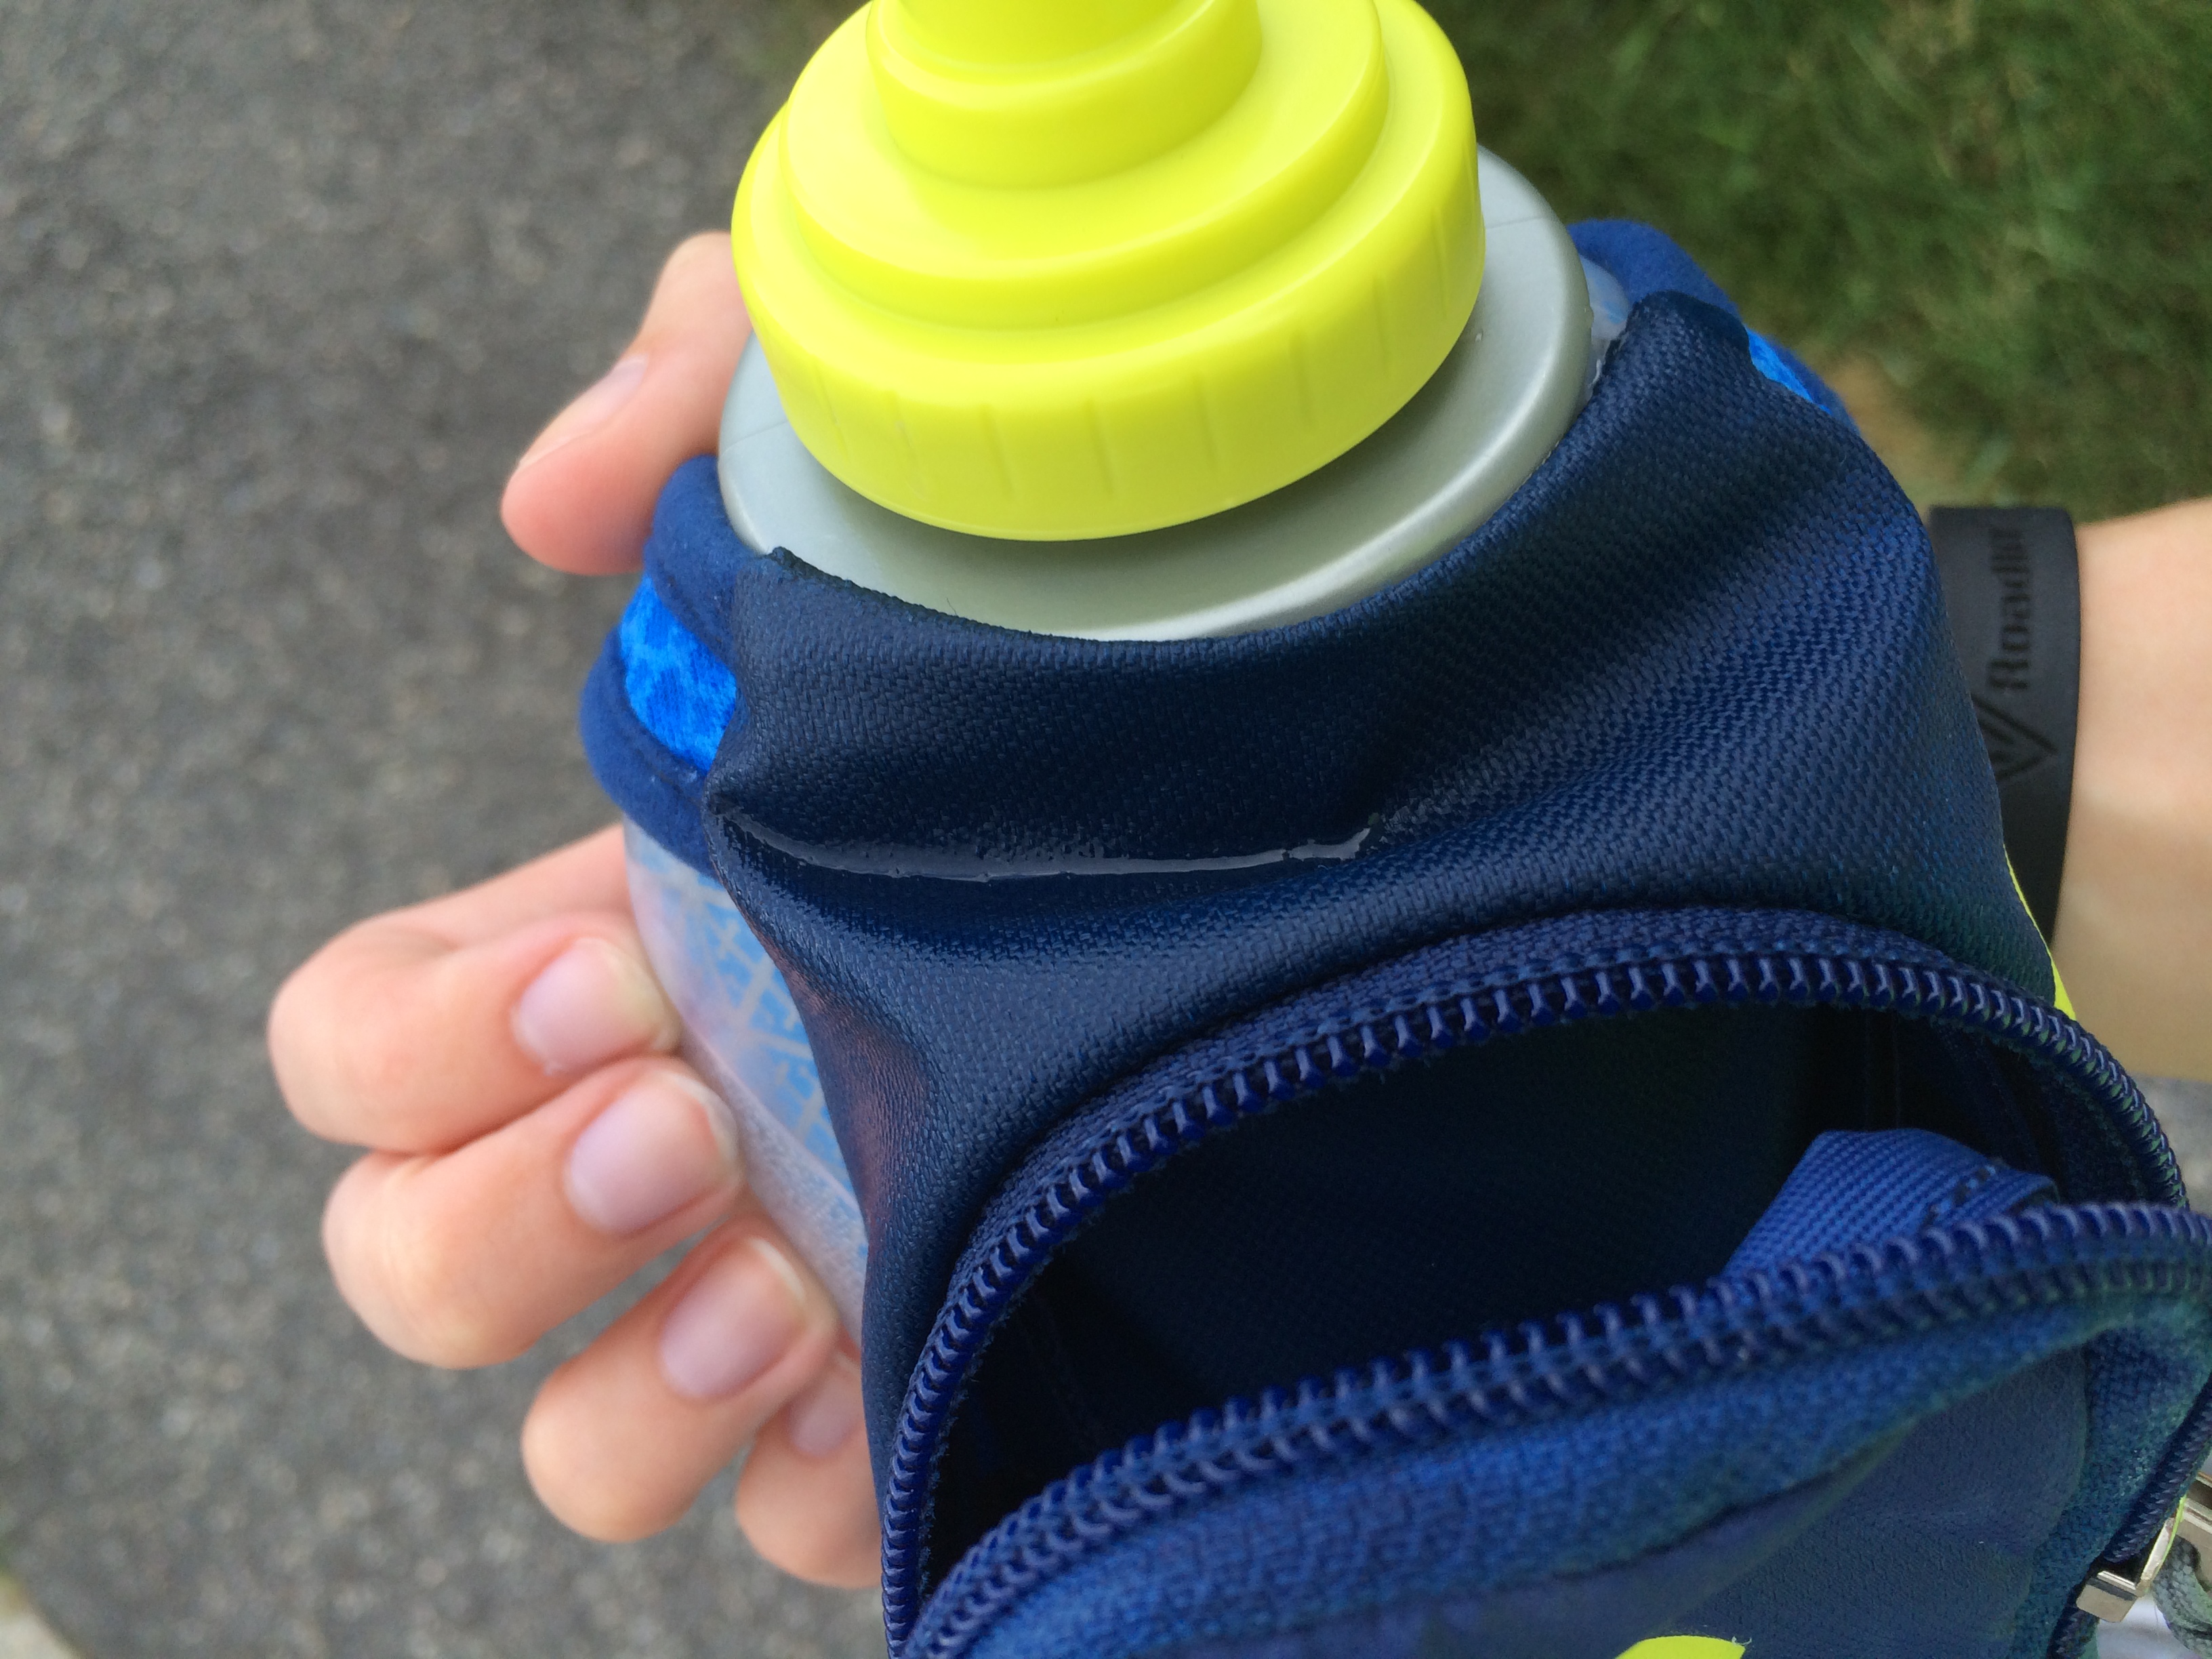 Trail Runner's Gear Review: Nathan SpeedDraw Plus Insulated Flask — ATRA